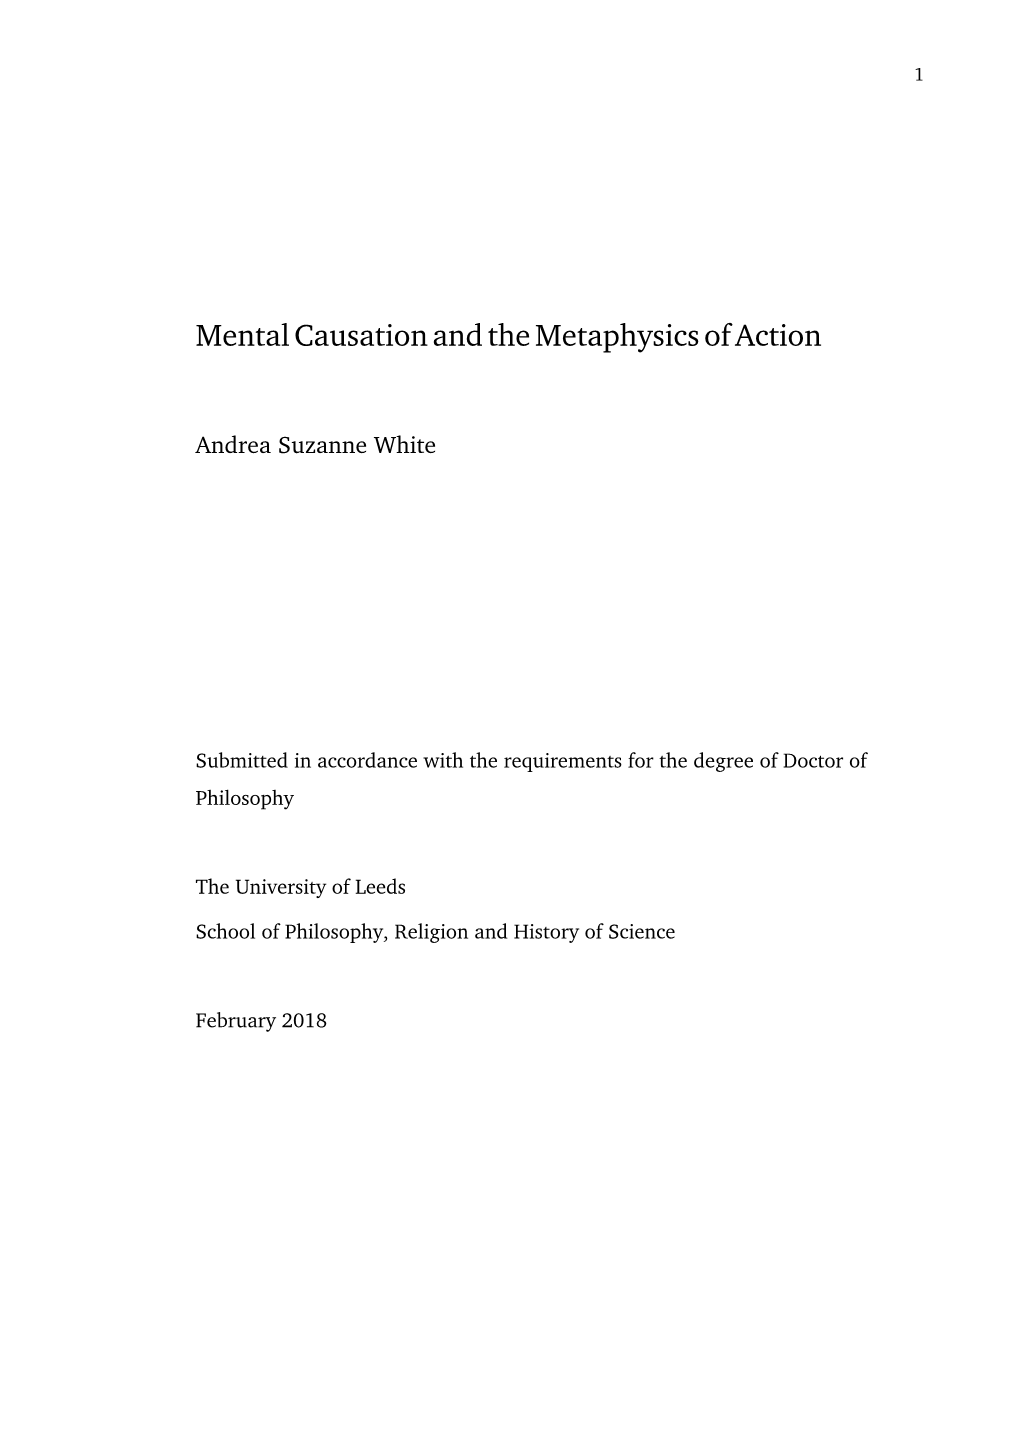 Mental Causation and the Metaphysics of Action.Pdf